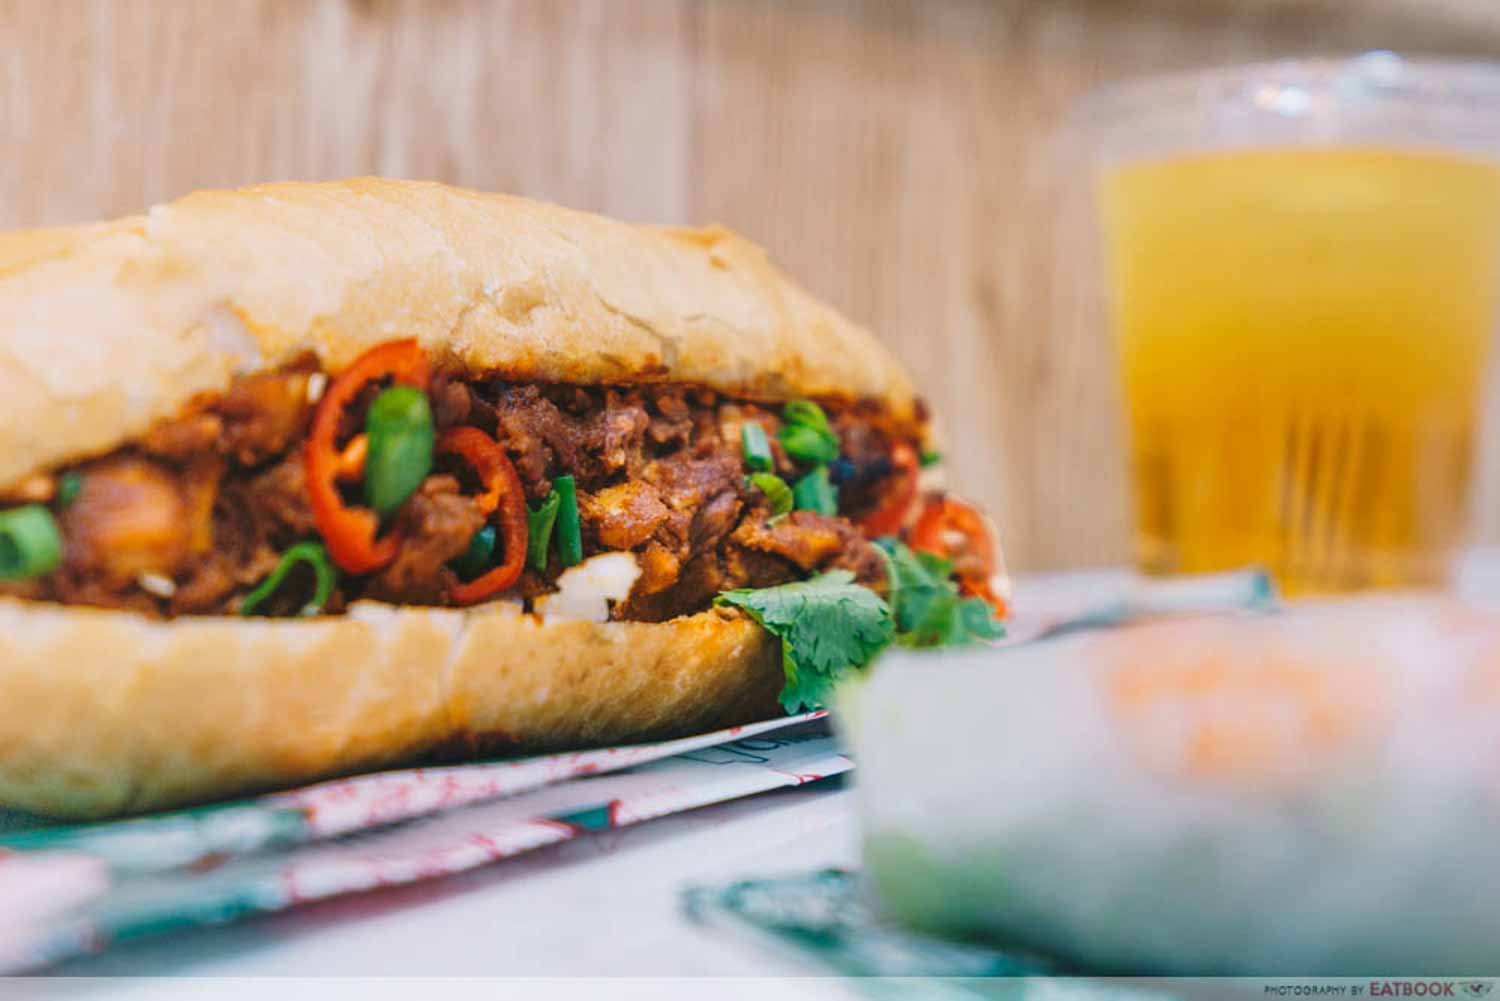 Banh You, Banh Mi - Butter chicken filling